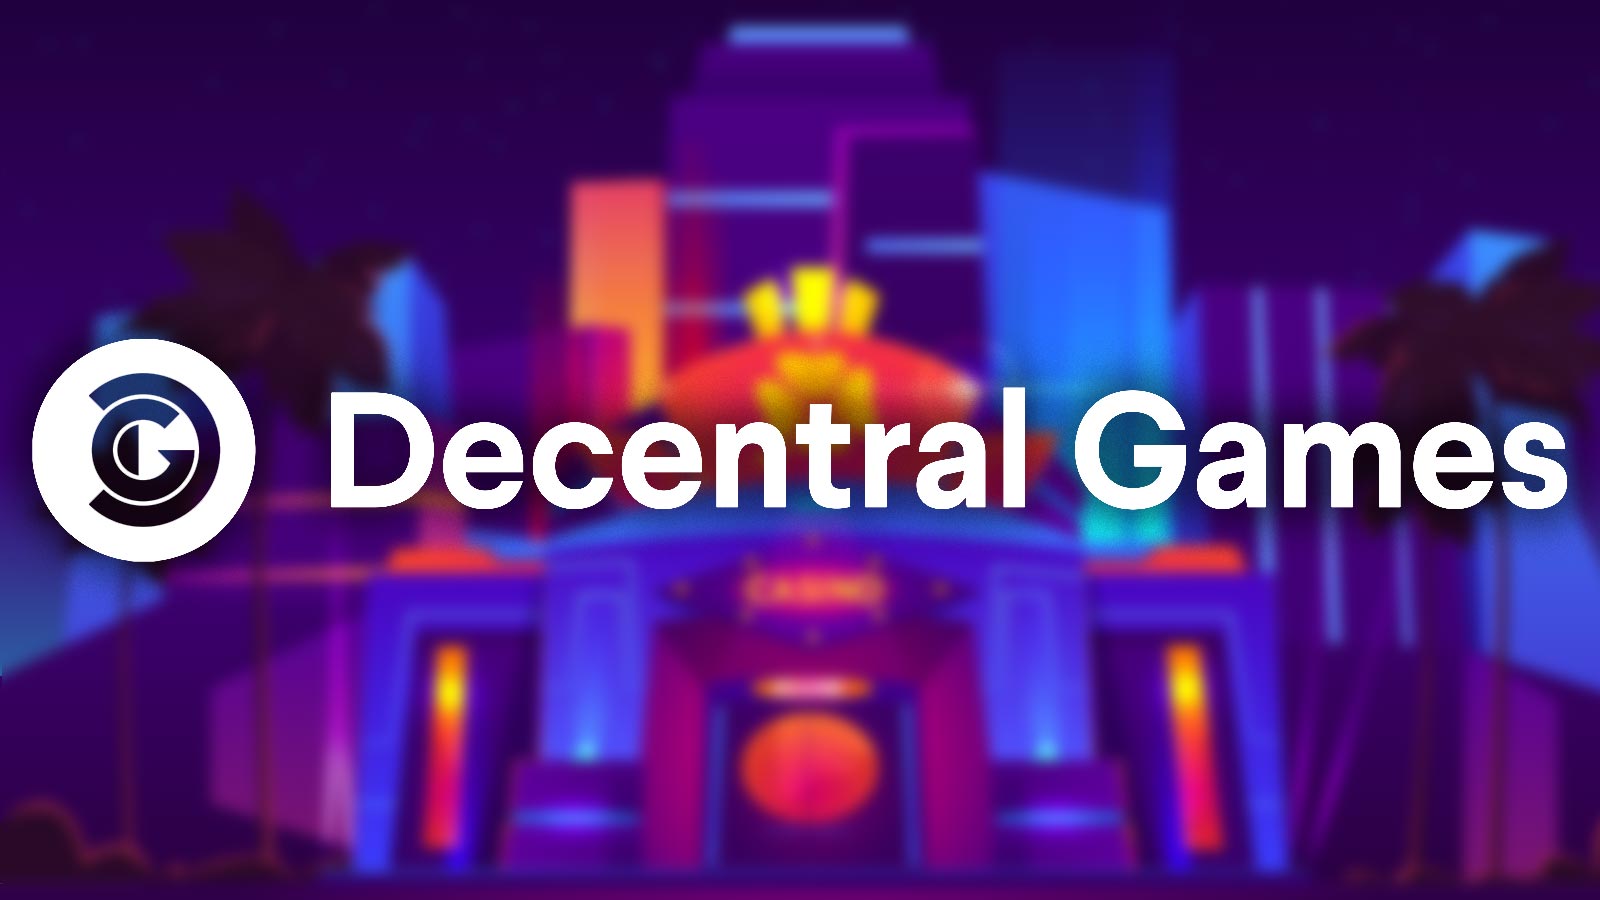 Decentral Games Metaverse Company On the Rise